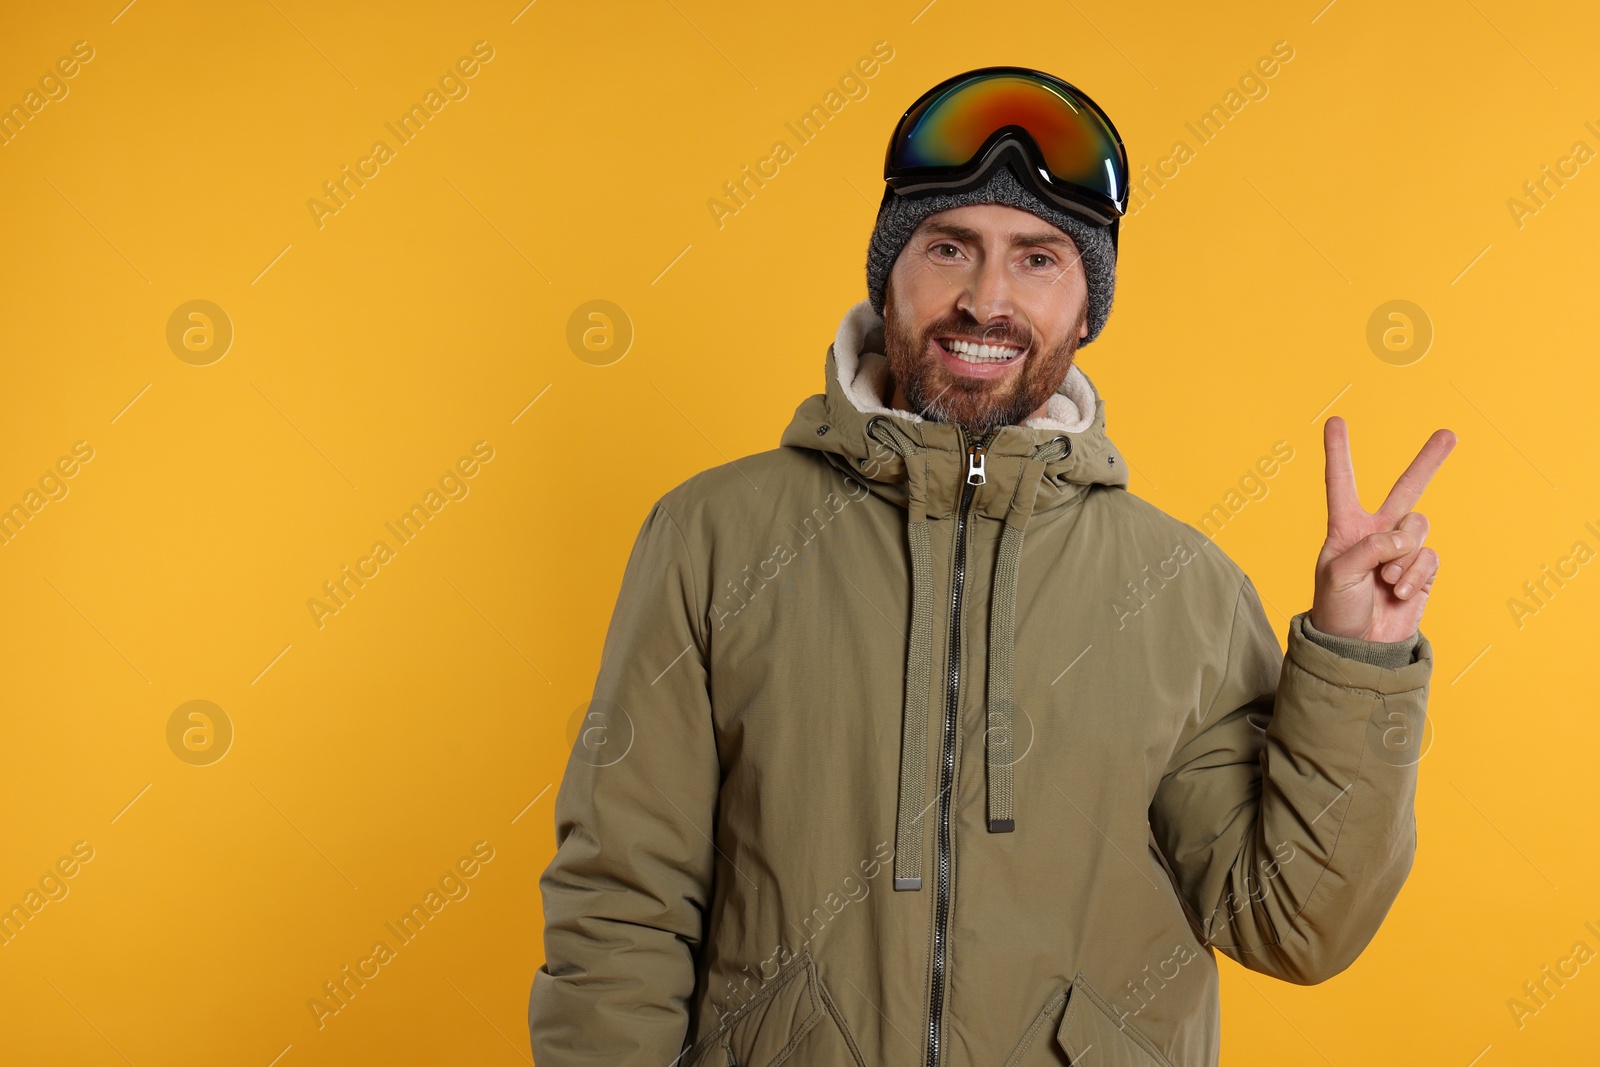 Photo of Winter sports. Happy man in ski suit and goggles showing V-sign on orange background, space for text